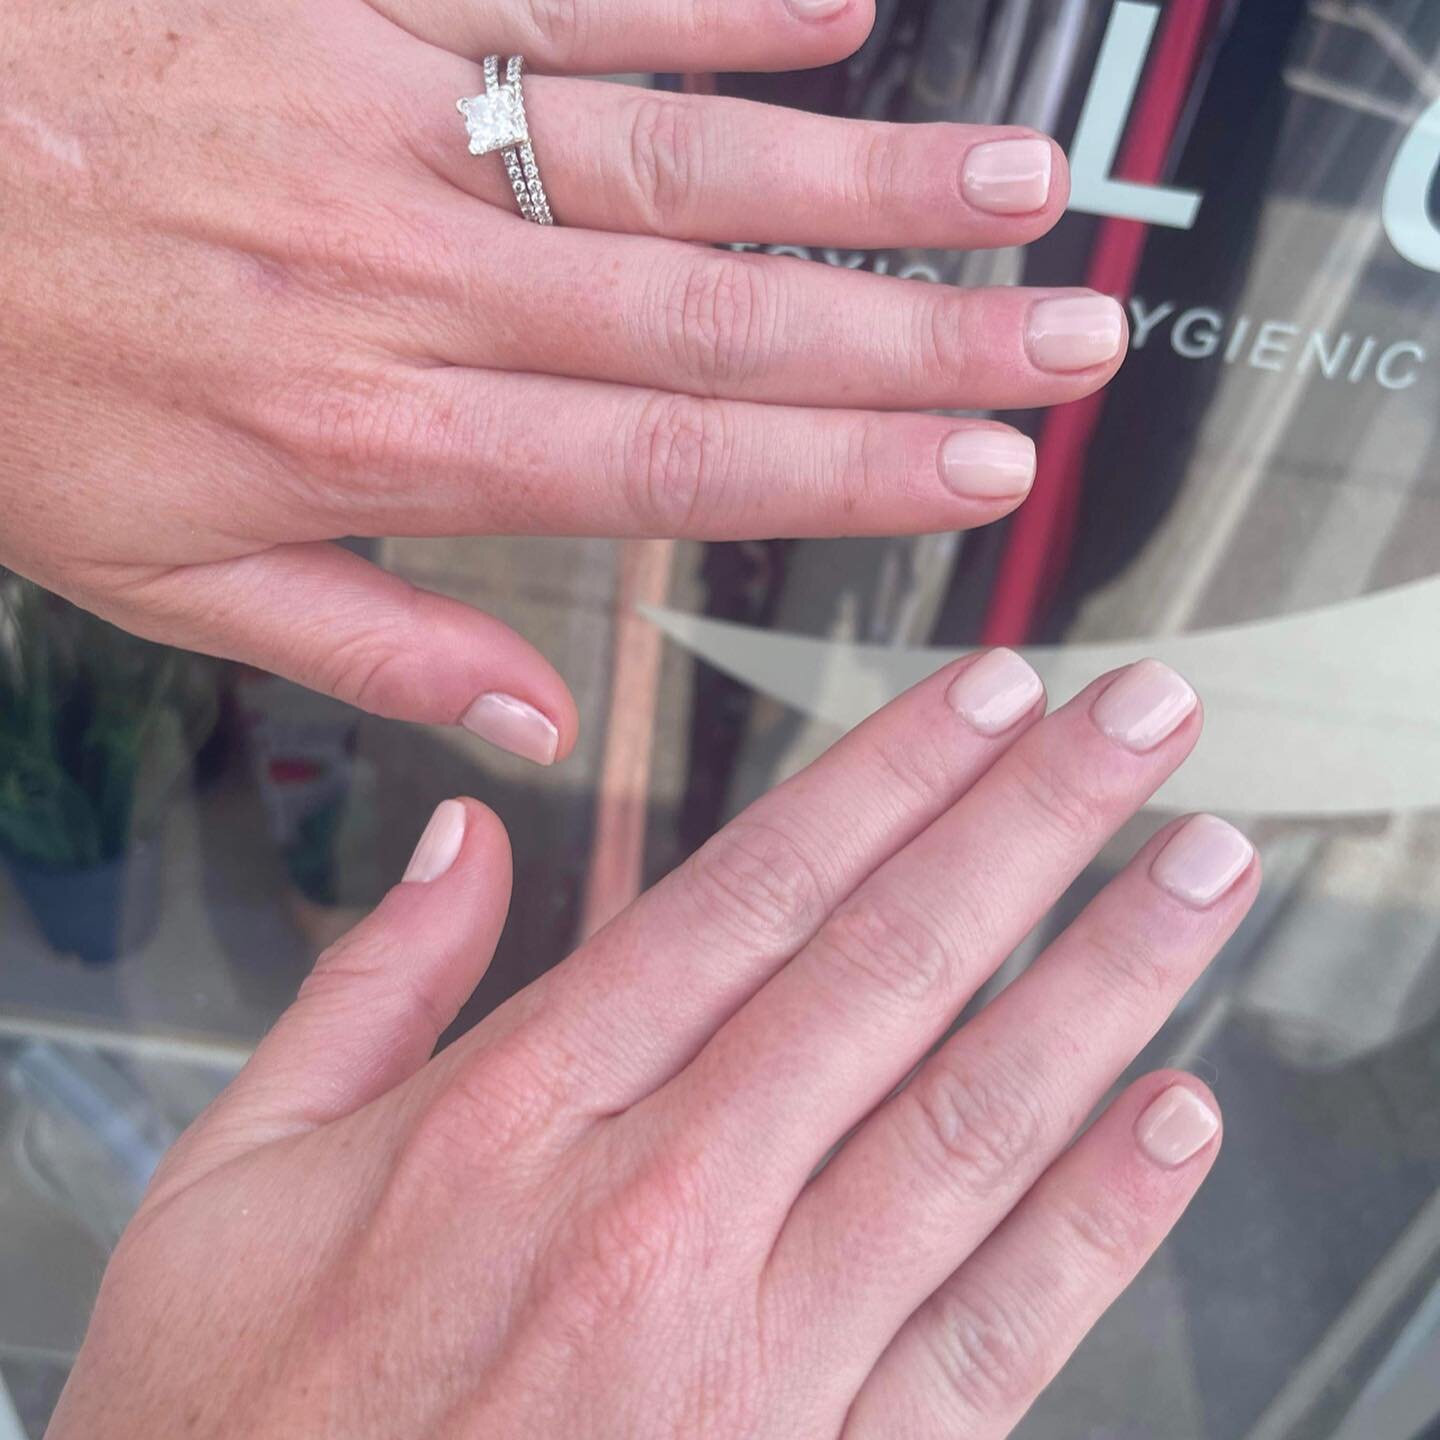 nothing wrong with being nude sometimes 😏😉
:Gel mani:
🚫Fume Free
🚫Dust Free
🚫No drilling on the natural nail 
🚫Fast and Easy Soak Off 
🐰Cruelty Free 
🌱Vegan Friendly 
📆2 Week &ldquo;no chip&rdquo; guarantee 
 #gelxnails  #apres #gelxtampa #f